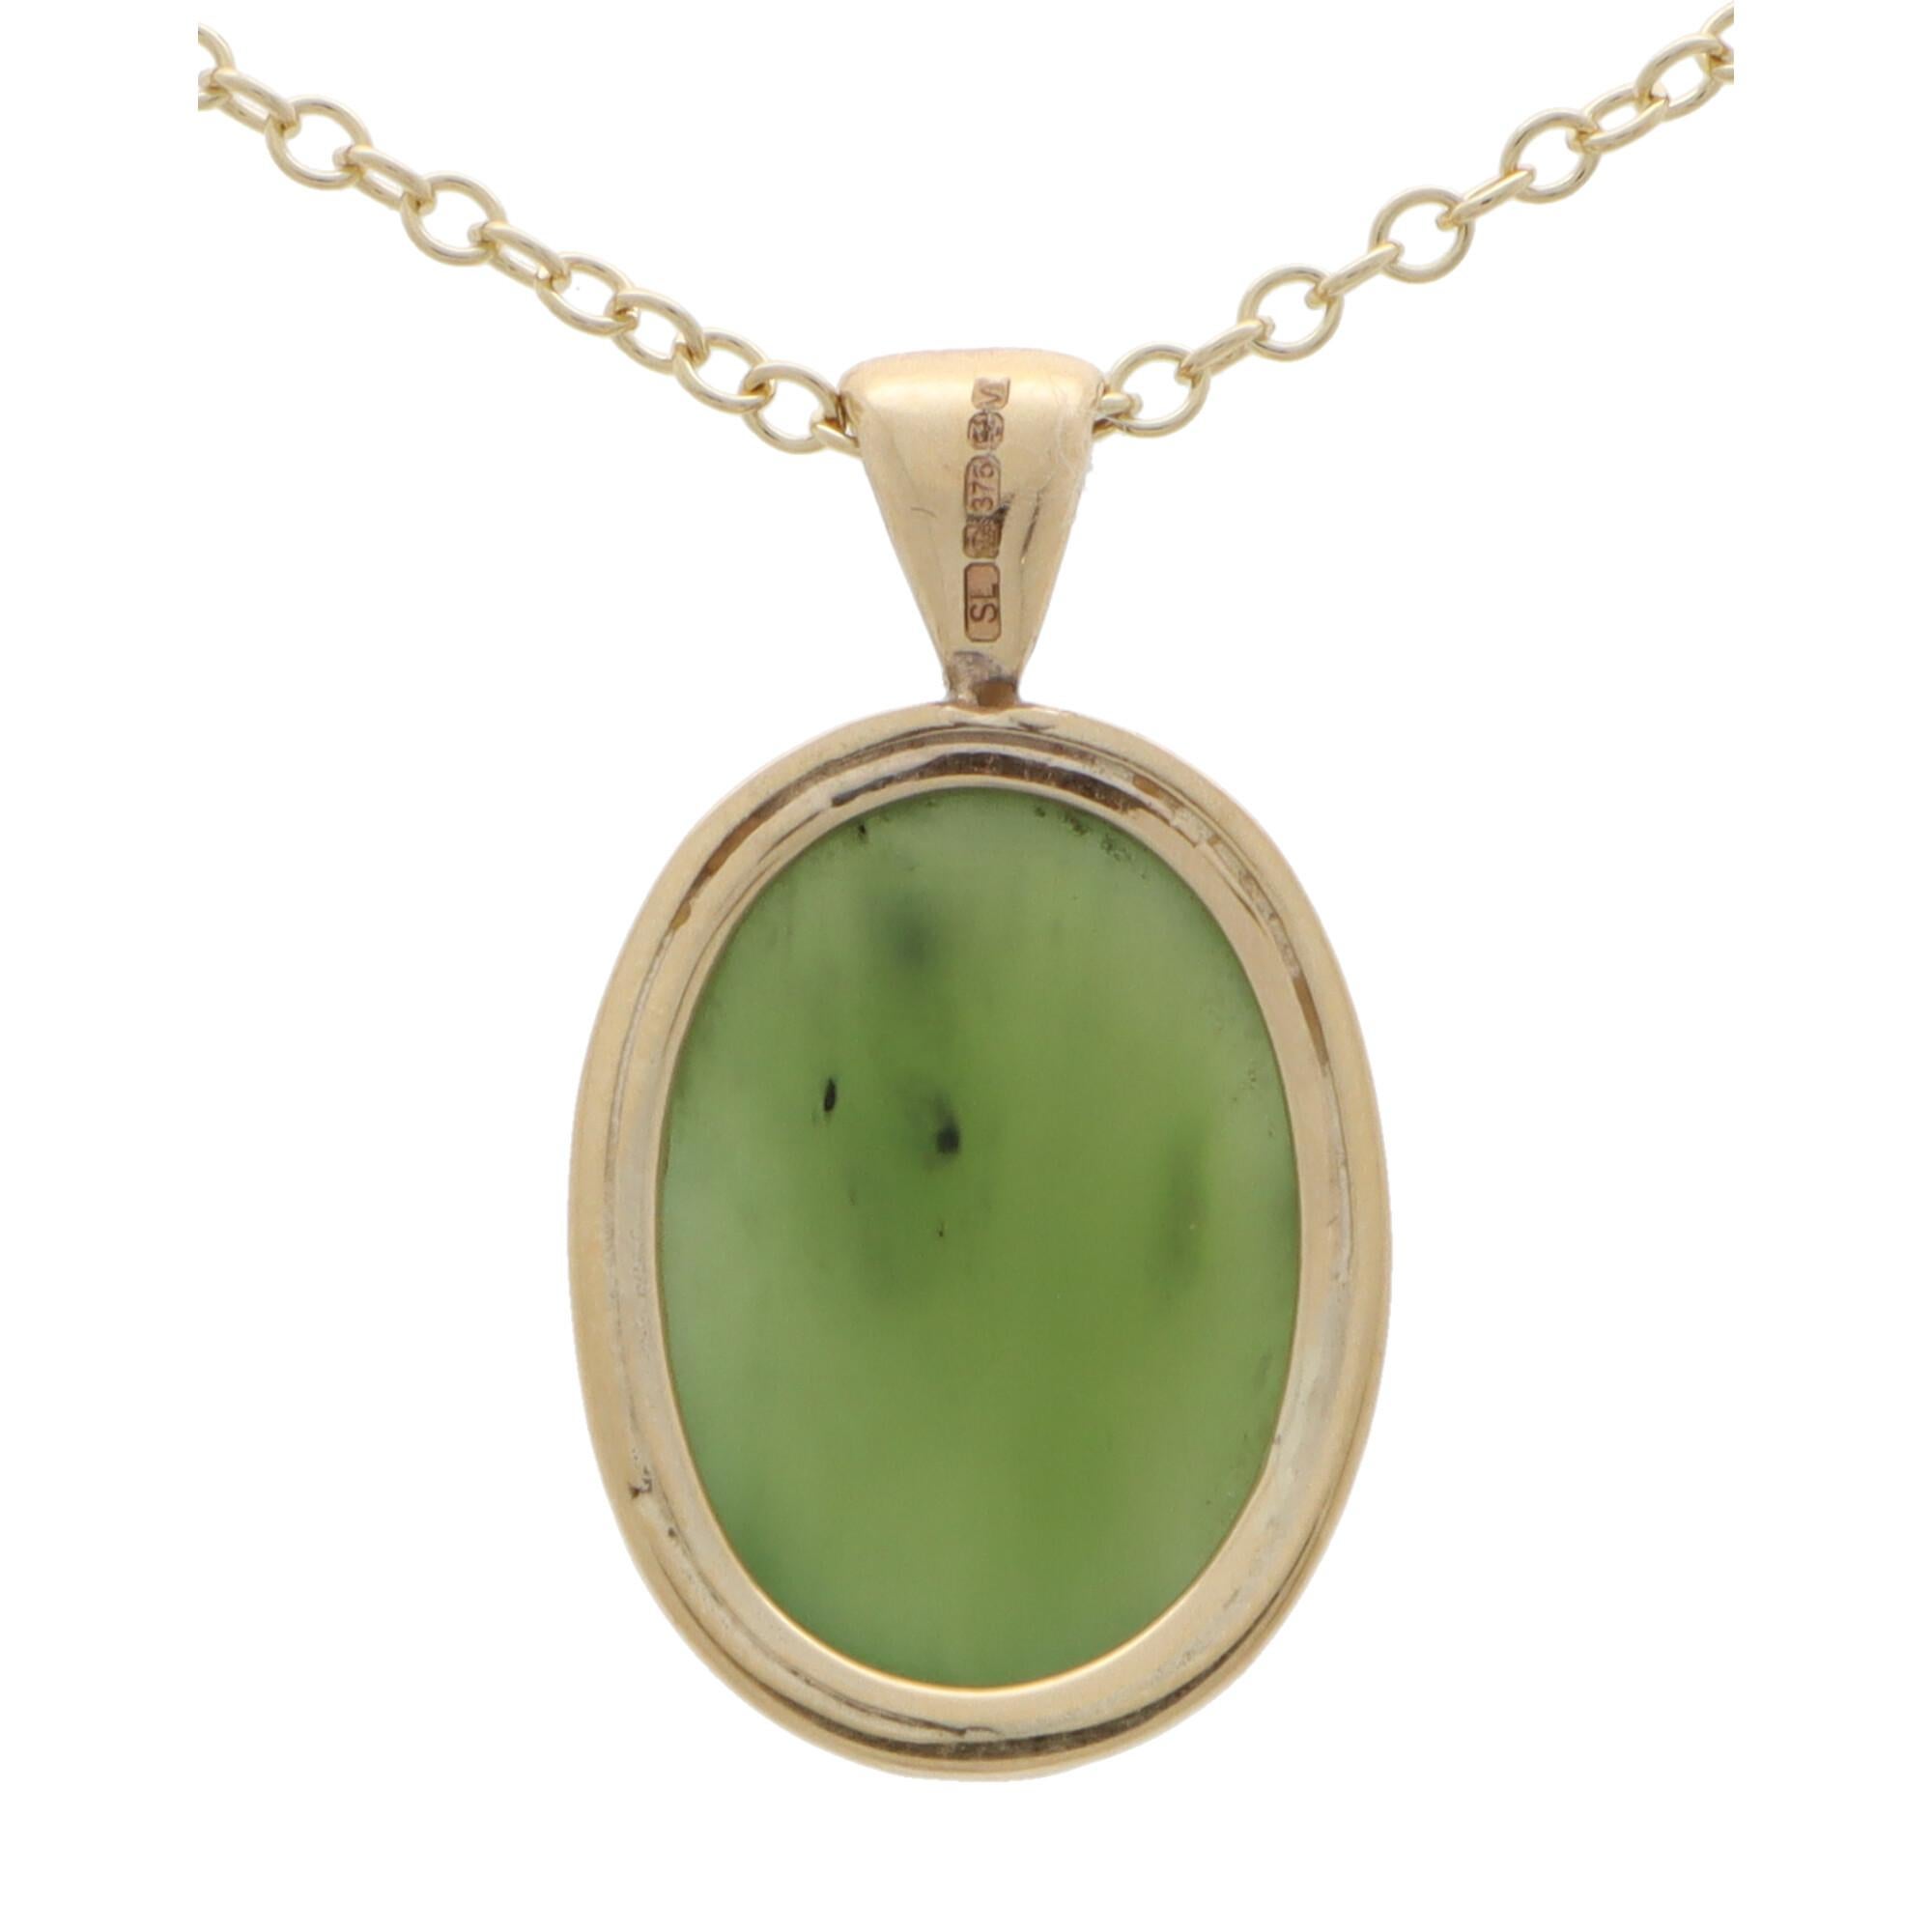 Cabochon Oval Nephrite Pendant Necklace Set in 9k Yellow Gold